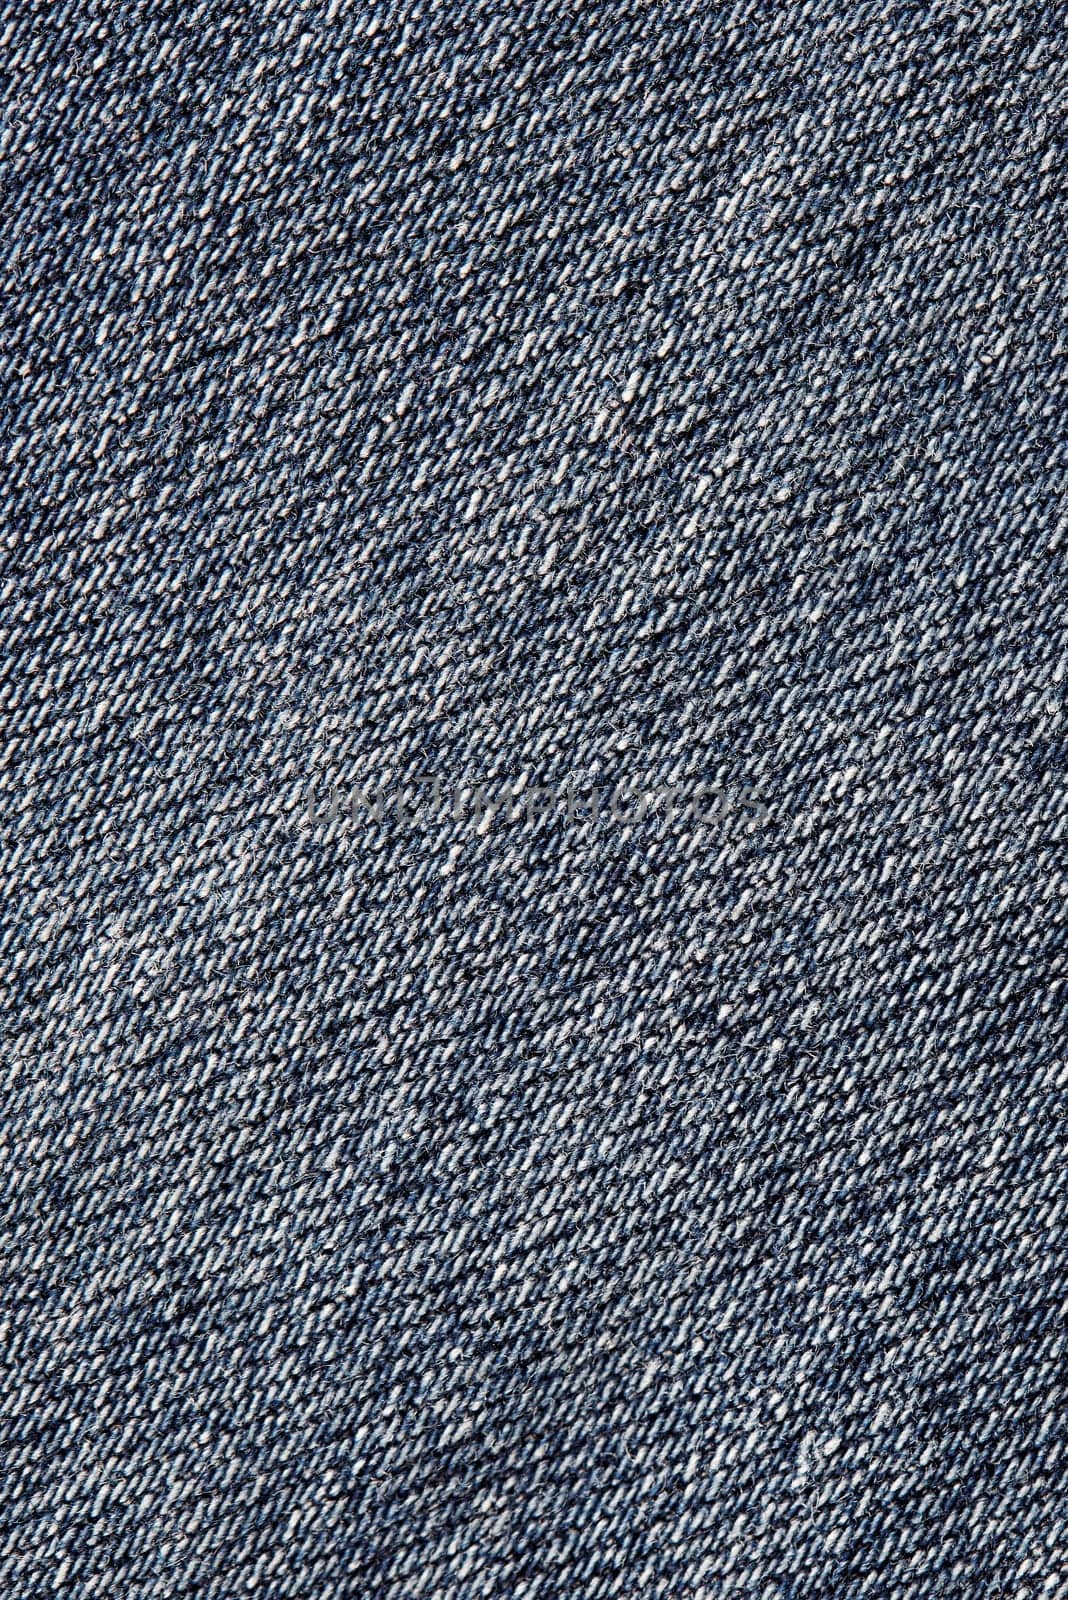 Fabric texture. Blue jeans background and texture. Close up of blue jeans background. Denim texture in high-resolution by EvgeniyQW